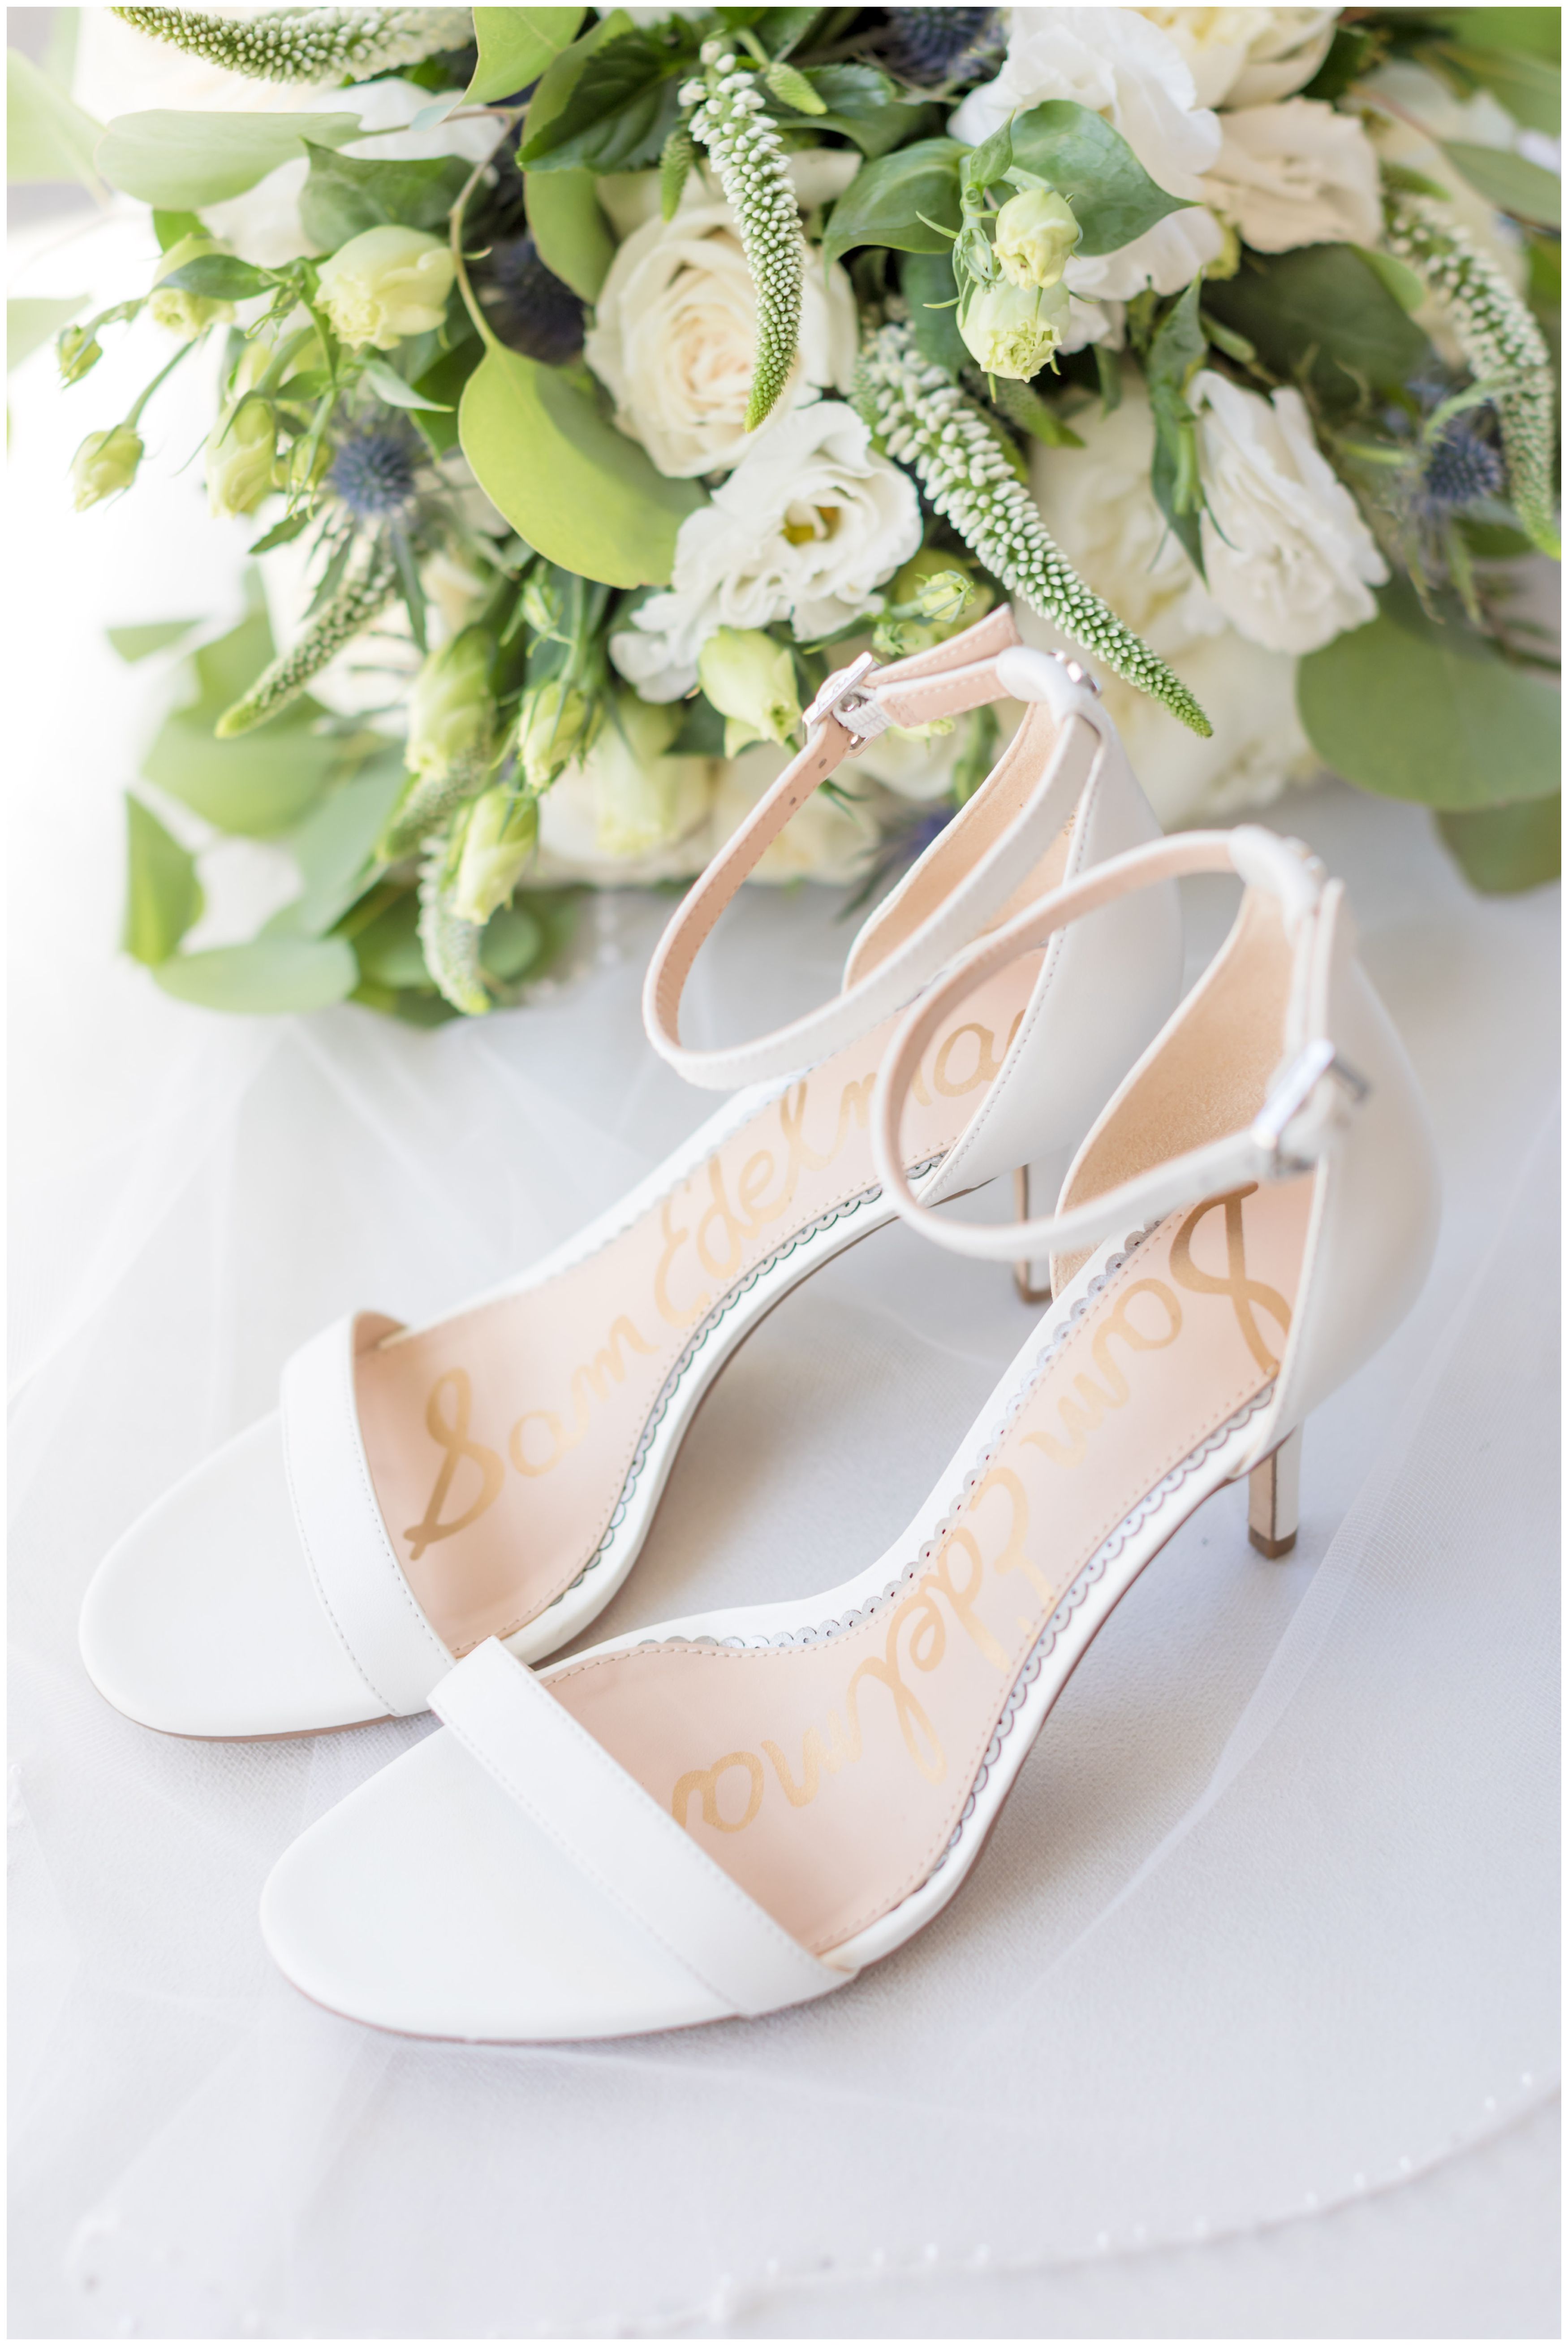 Sam Edelman White Bridal Shoes with classic veil and bouquet